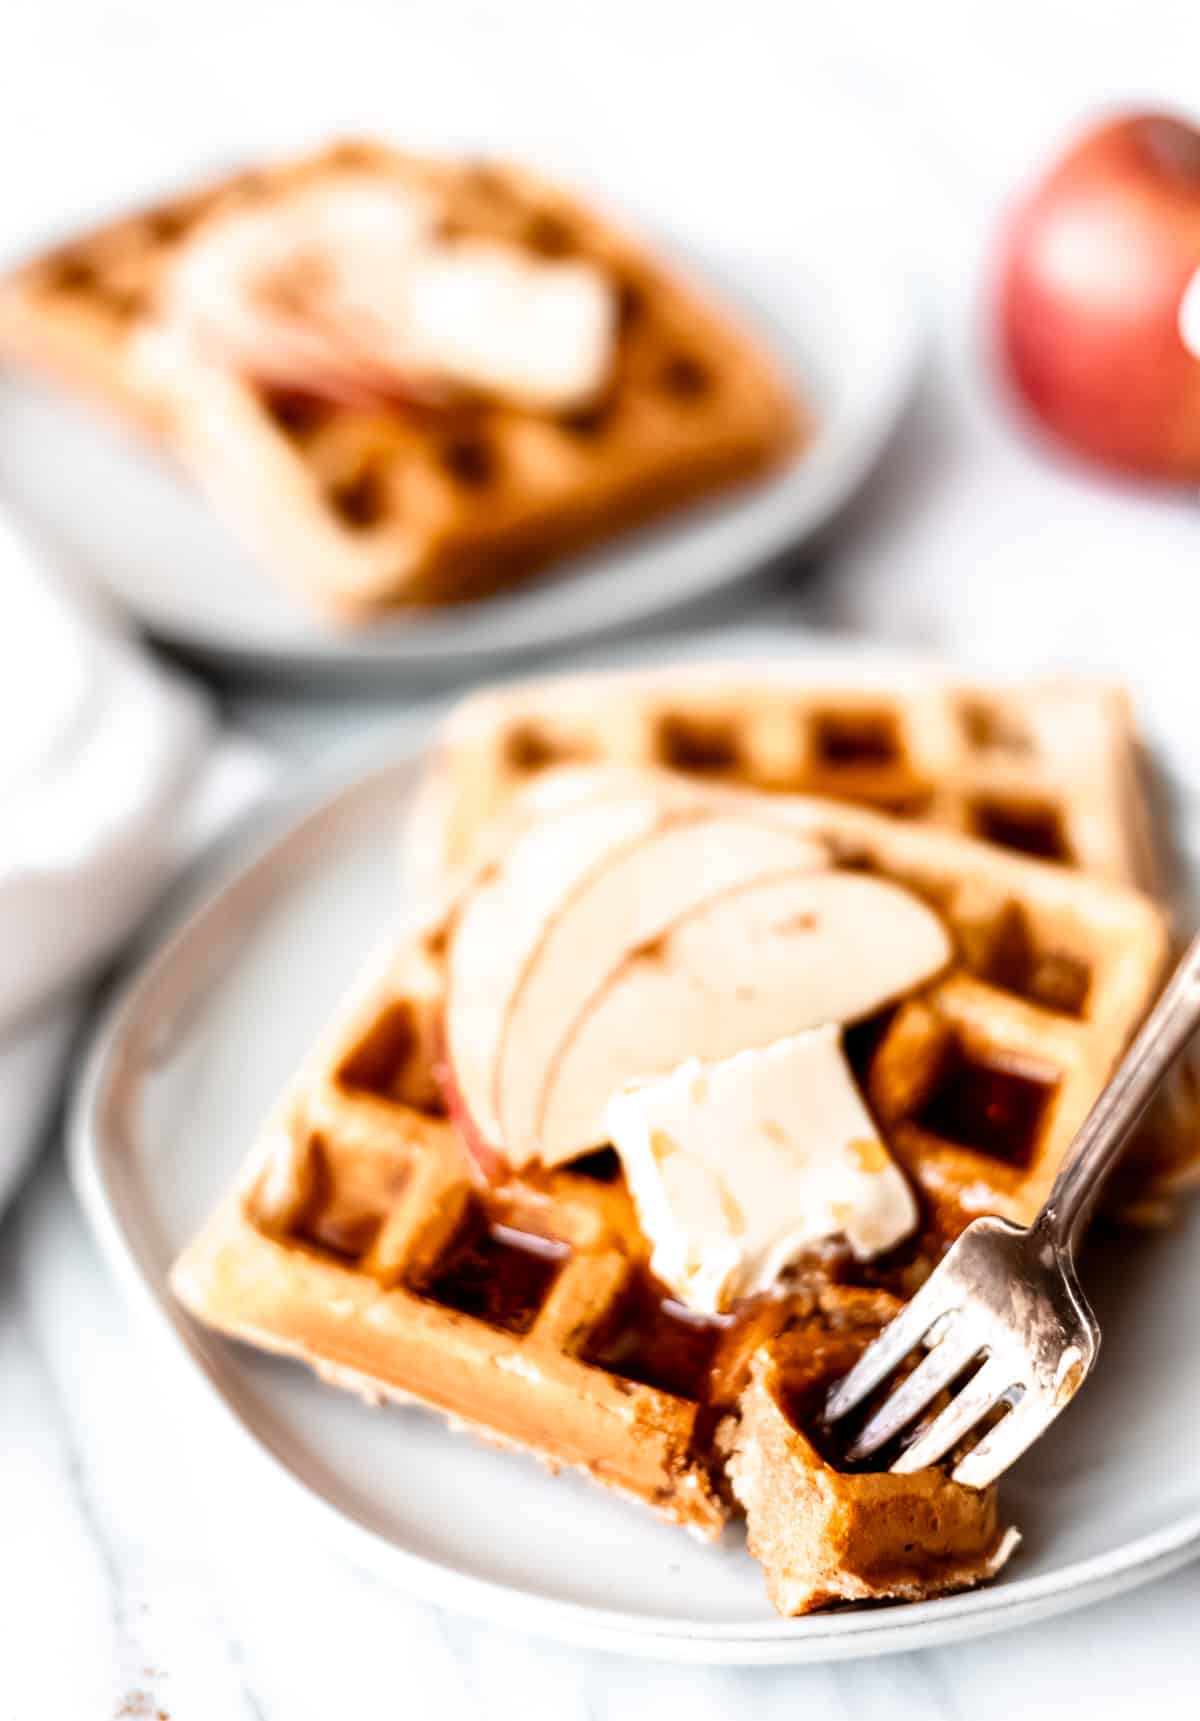 A fork with a bit of apple cinnamon waffle on it in front of 2 waffles stacked on a plate and topped with butter, syrup and apple slices.